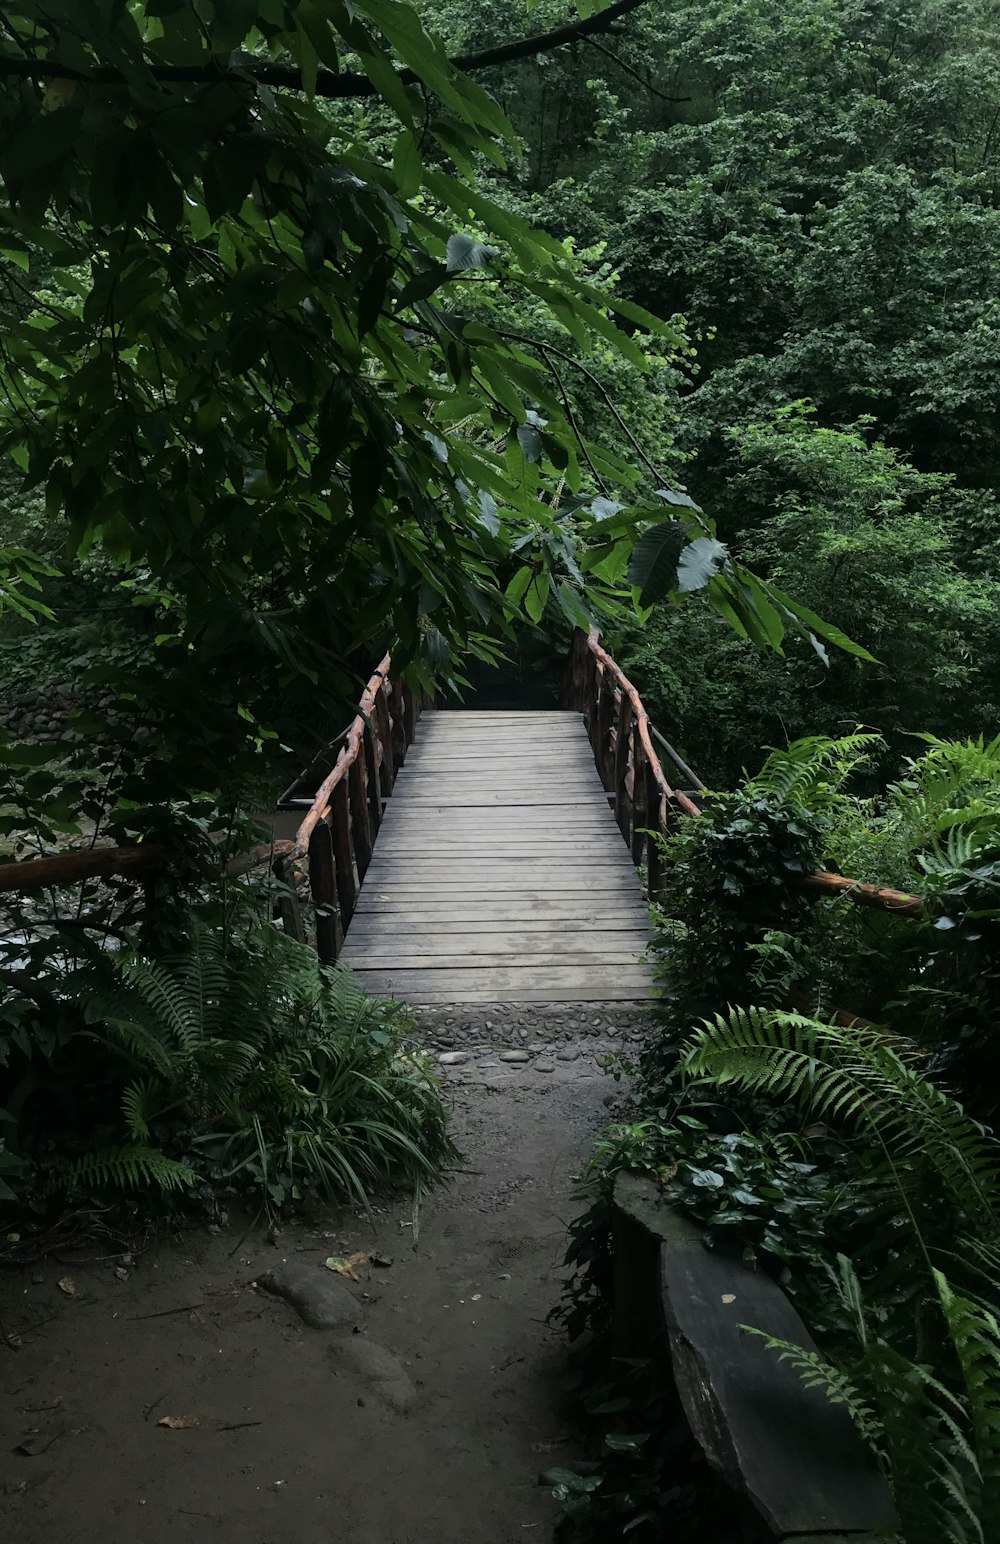 brown wooden bridge in the middle of green trees